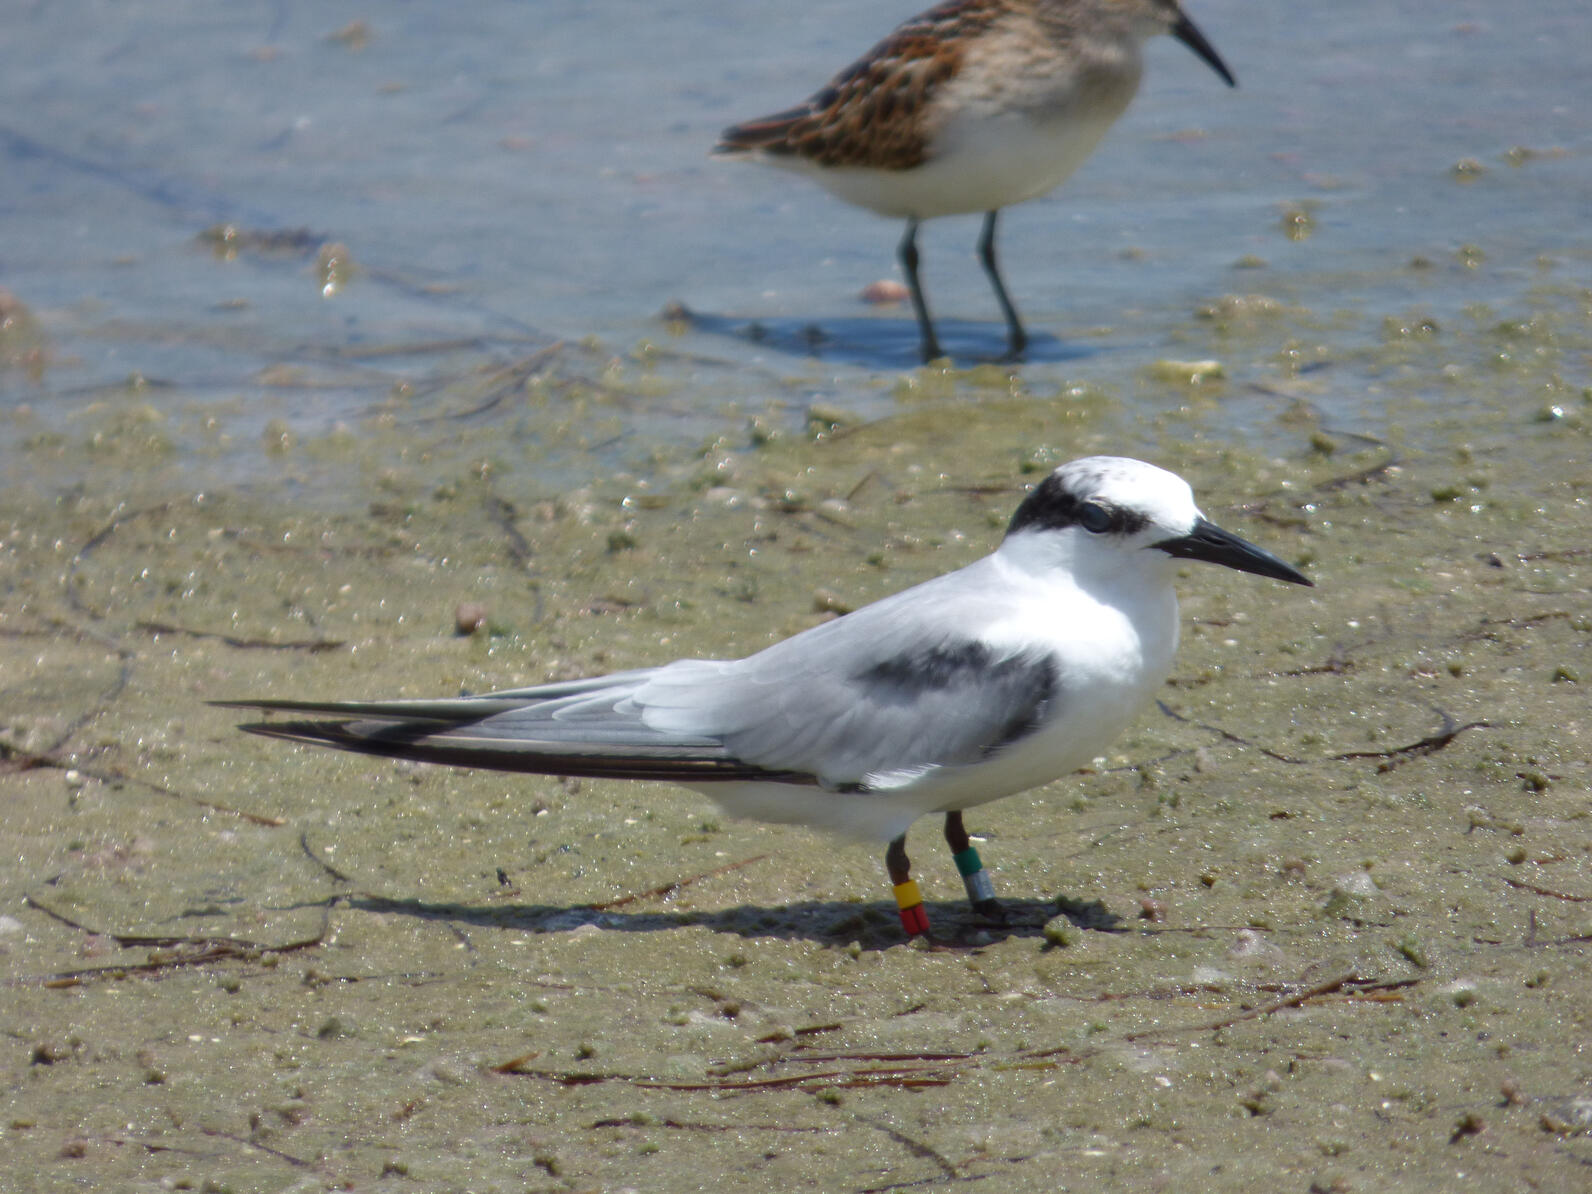 A juvenile, mostly-white Least Tern stands on a wet sandy beach.